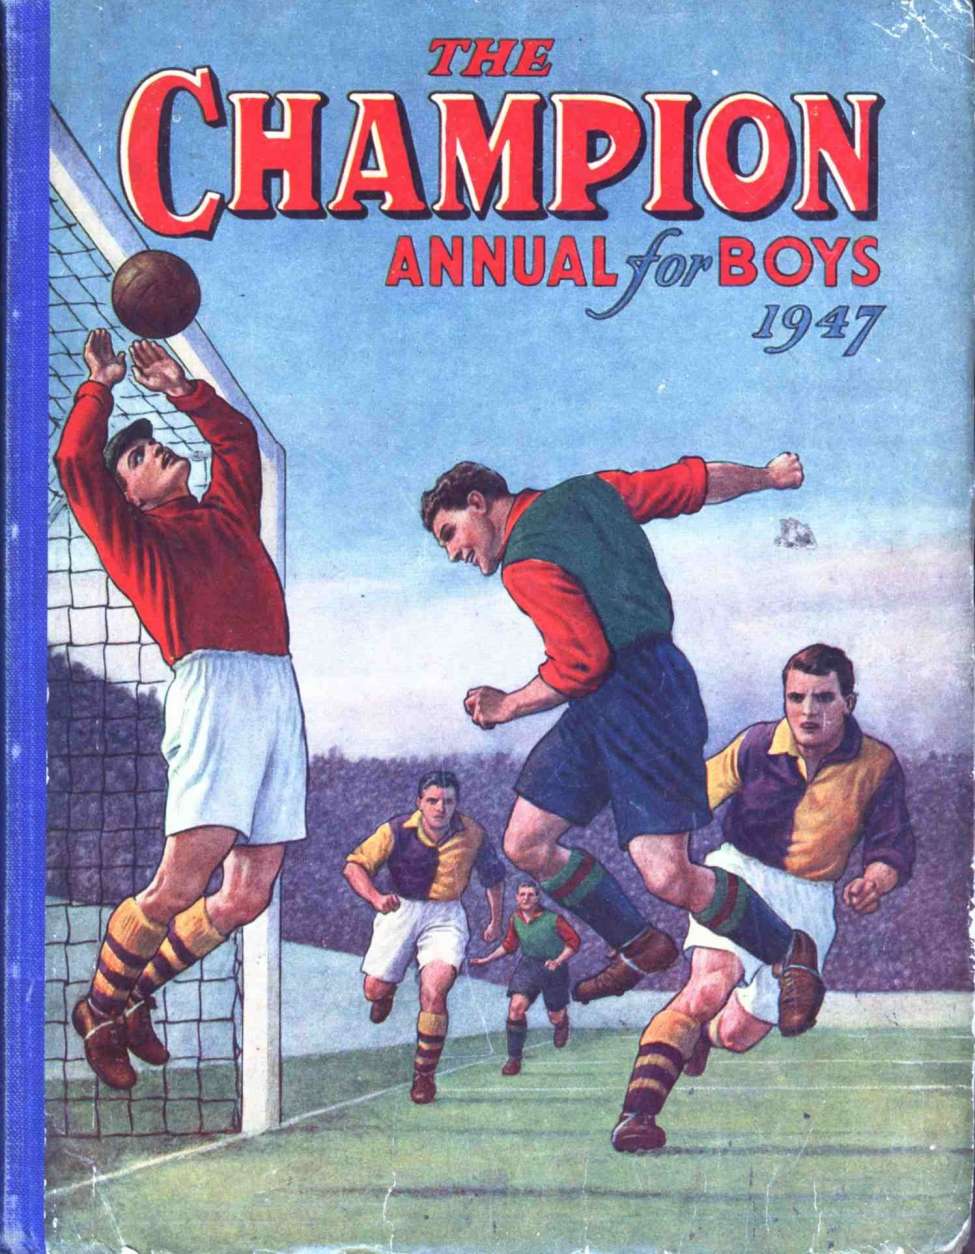 Comic Book Cover For The Champion Annual for Boys 1947